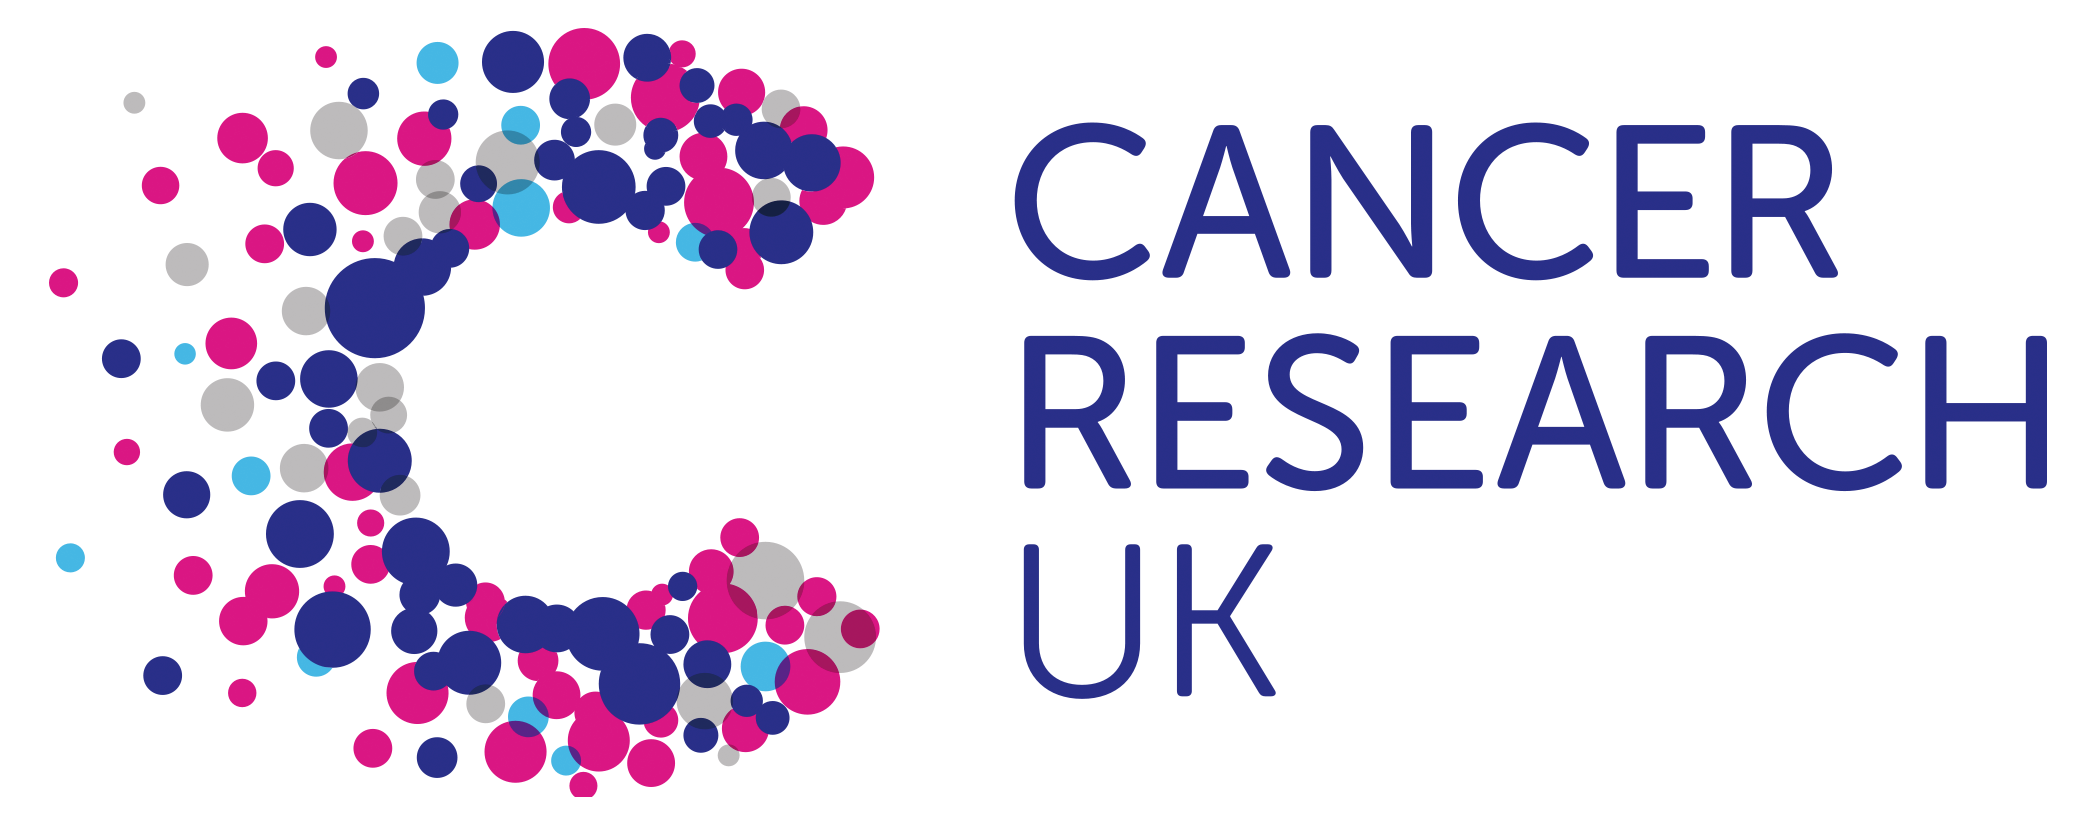 Cancer research